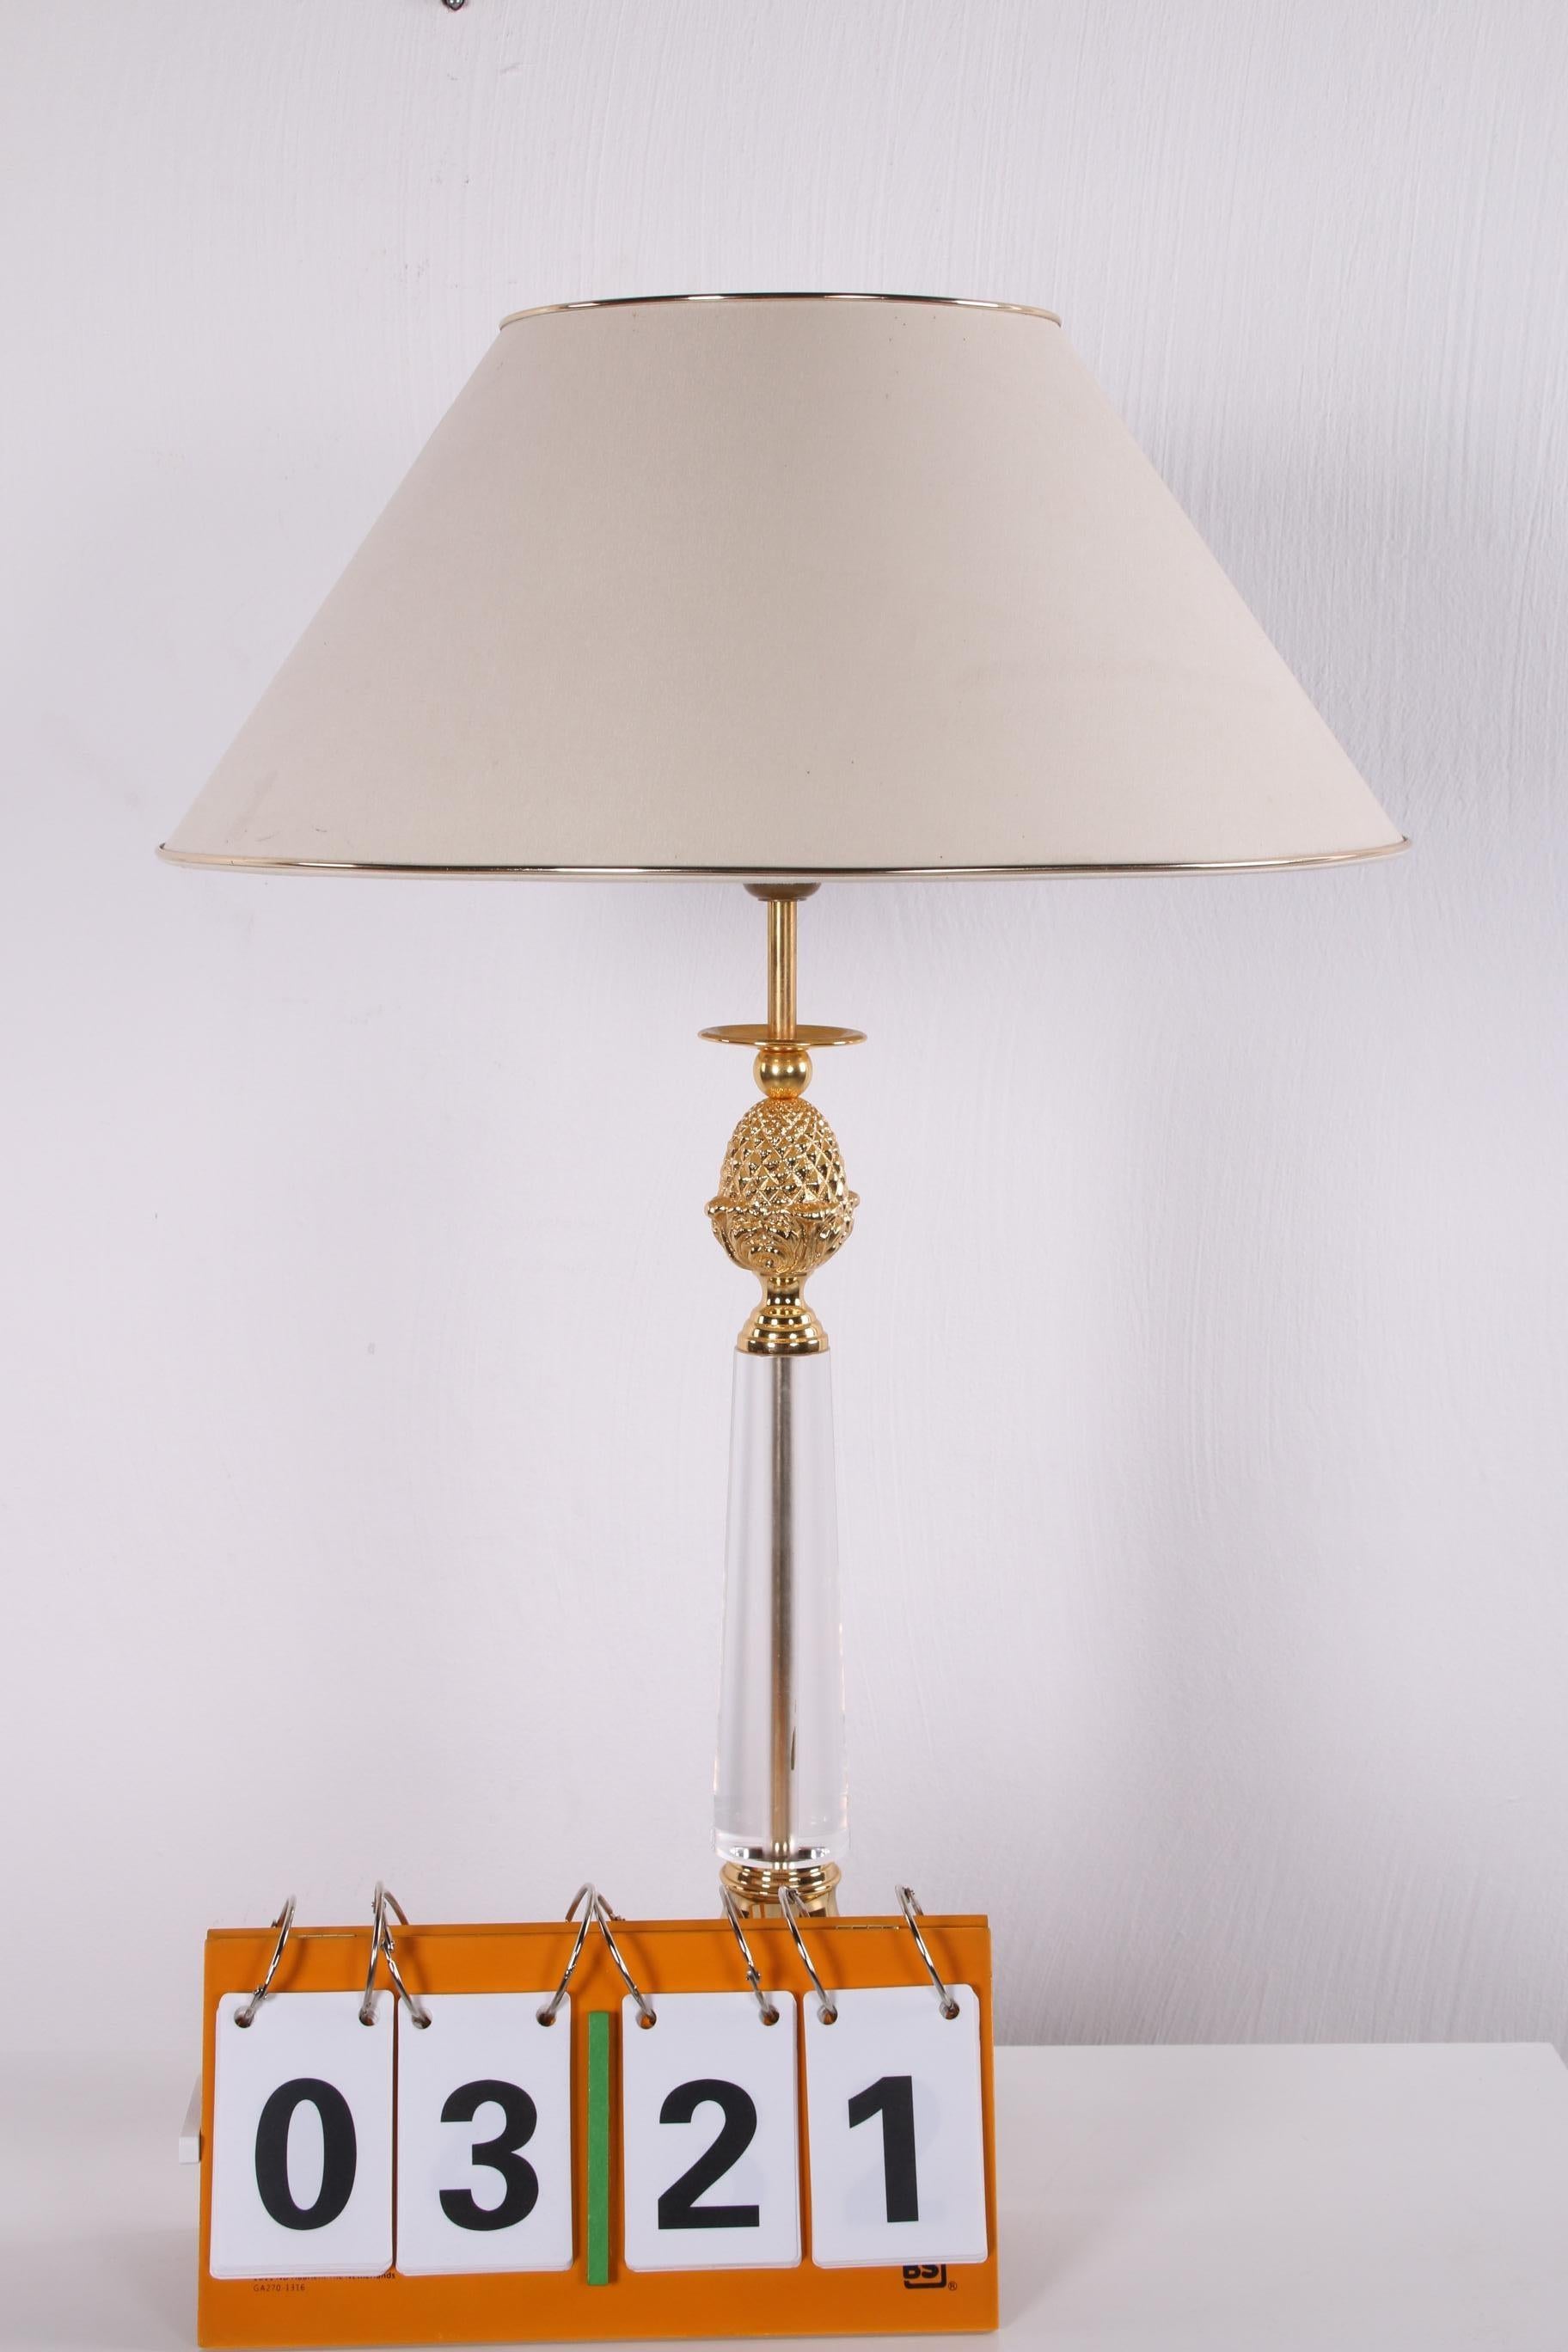 Italian Plexiglass Table Lamp with Golden Elements Hollywood Regency Style For Sale